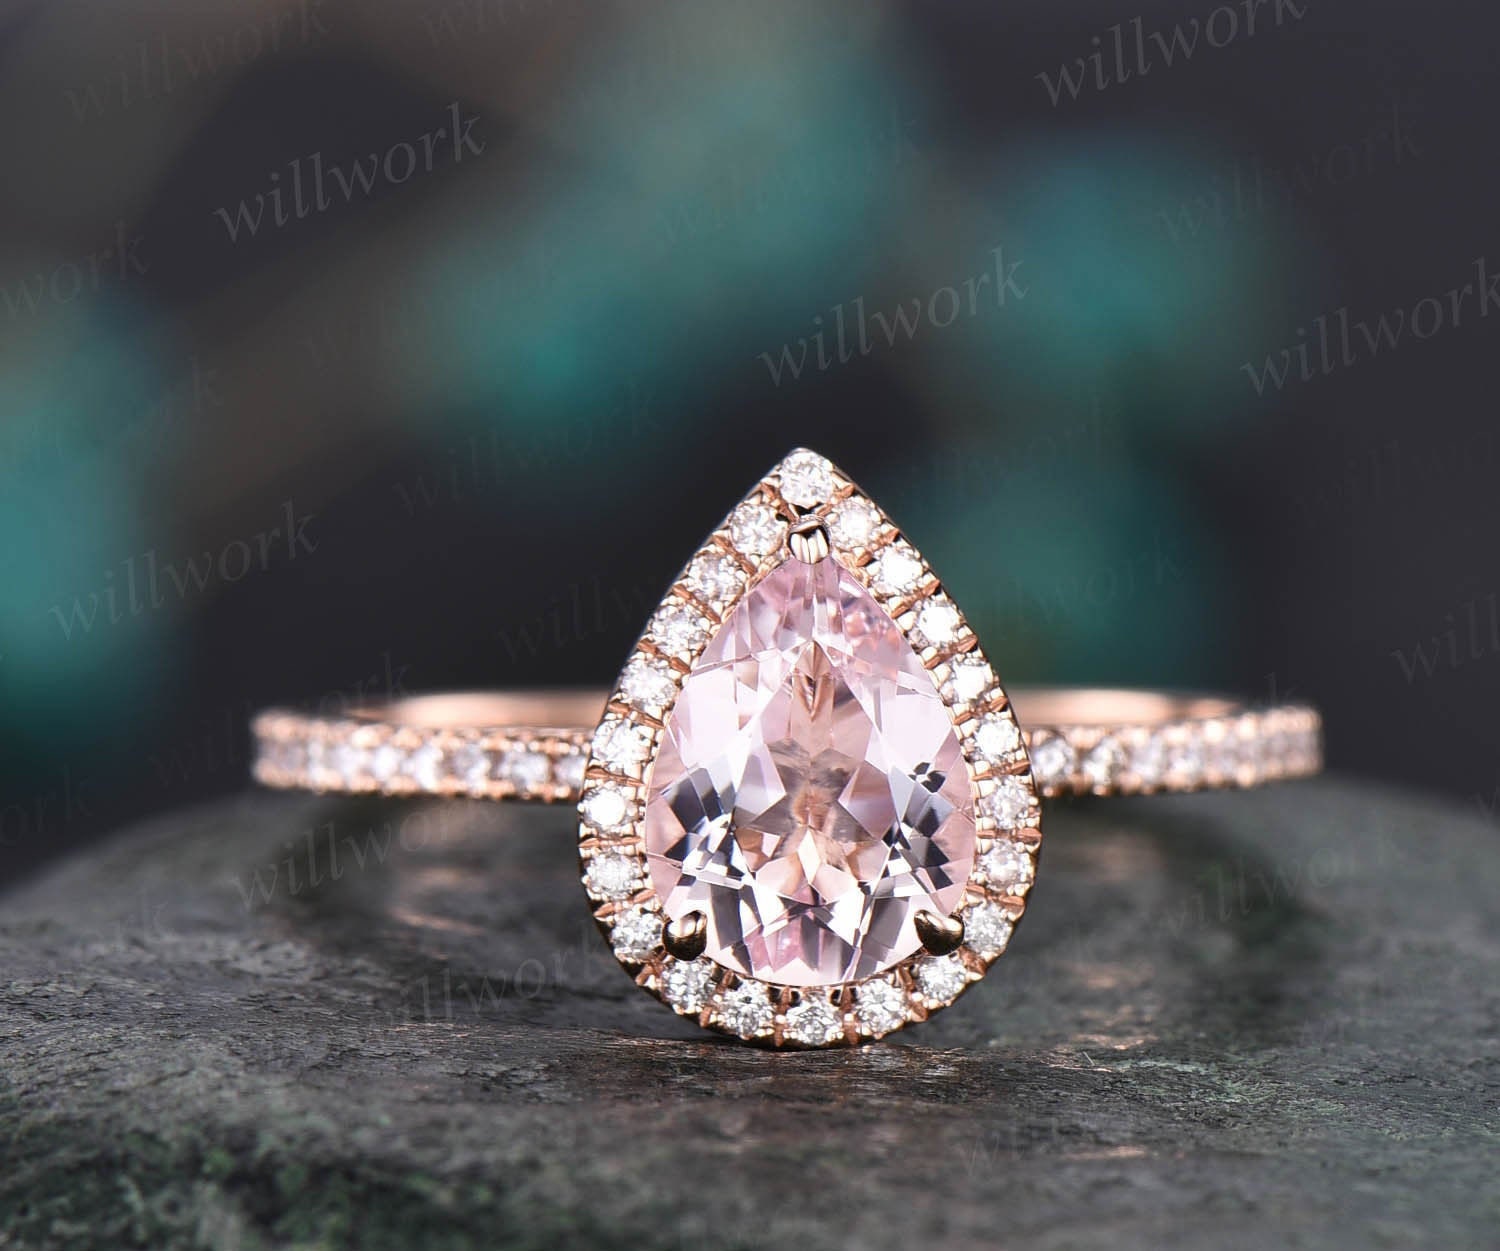 Pre-Owned 1.65ct GIA Fancy Light Pink Diamond Ring